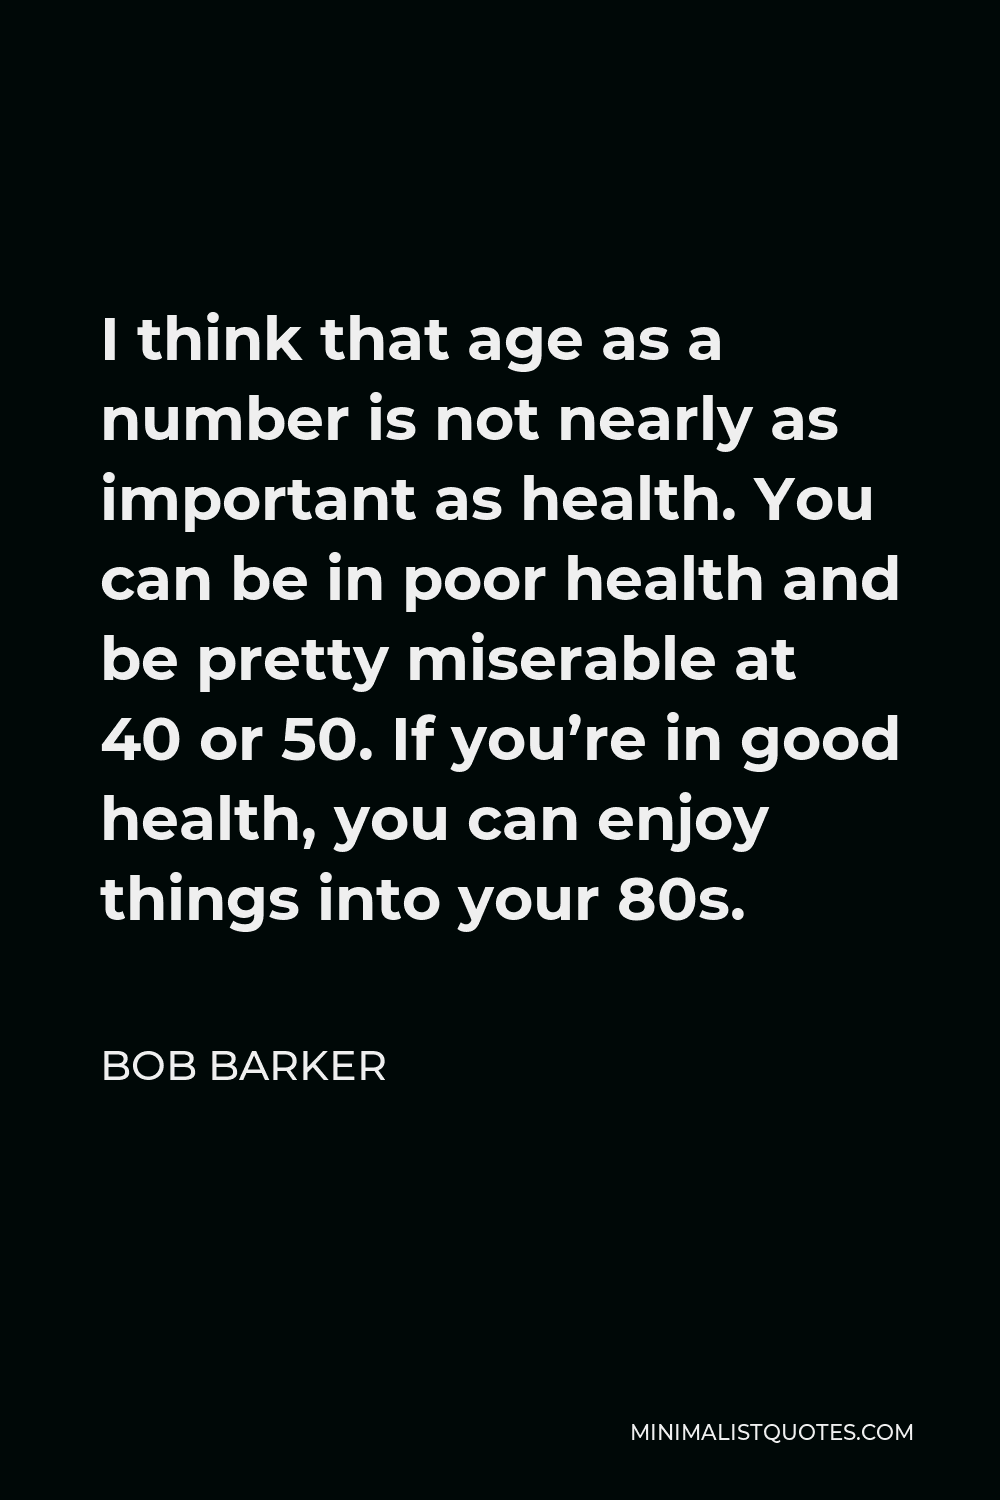 Bob Barker Quote - I think that age as a number is not nearly as important as health. You can be in poor health and be pretty miserable at 40 or 50. If you’re in good health, you can enjoy things into your 80s.